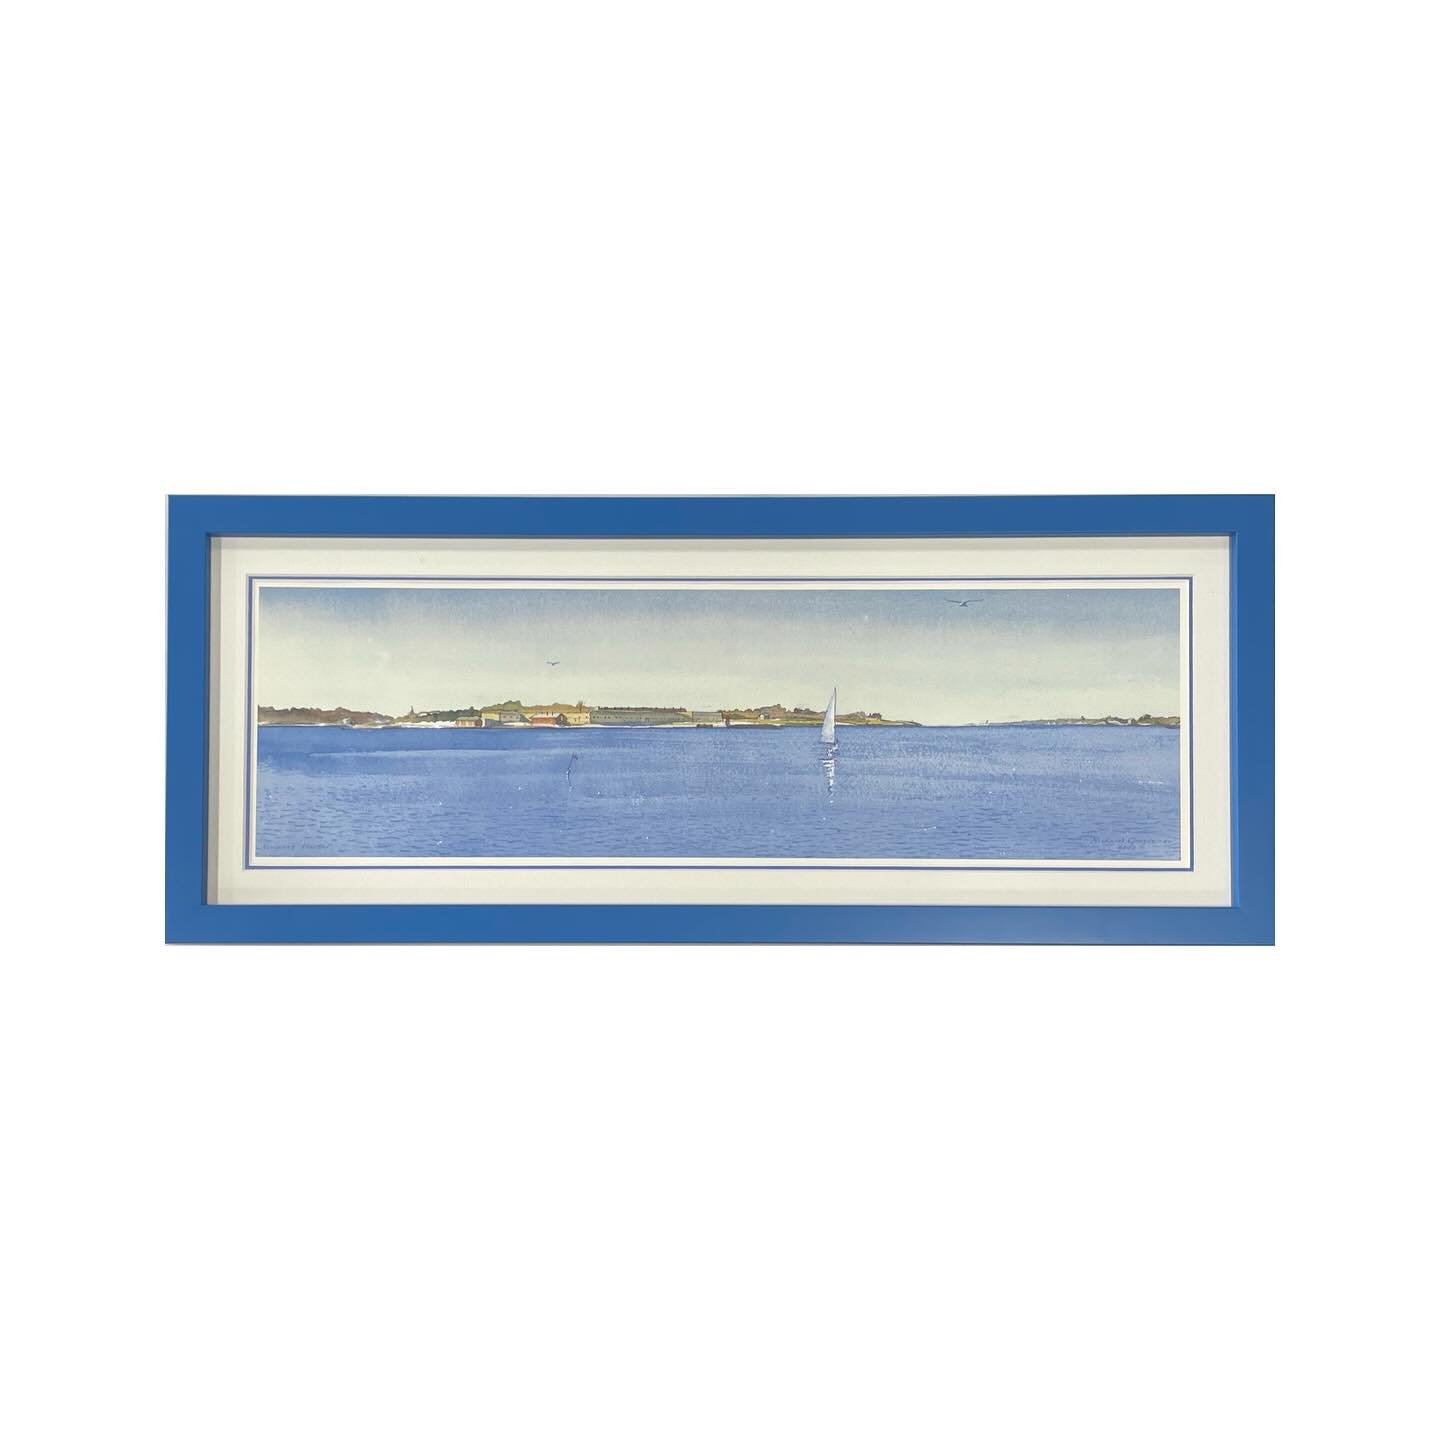 As the months get warmer, we&rsquo;re looking forward to days on the water! After all, who doesn&rsquo;t love the big blue 🩵🌊💙

Our customer brought in these three Richard Grosvenor prints to be framed, and we think they turned out beautifully. 
T